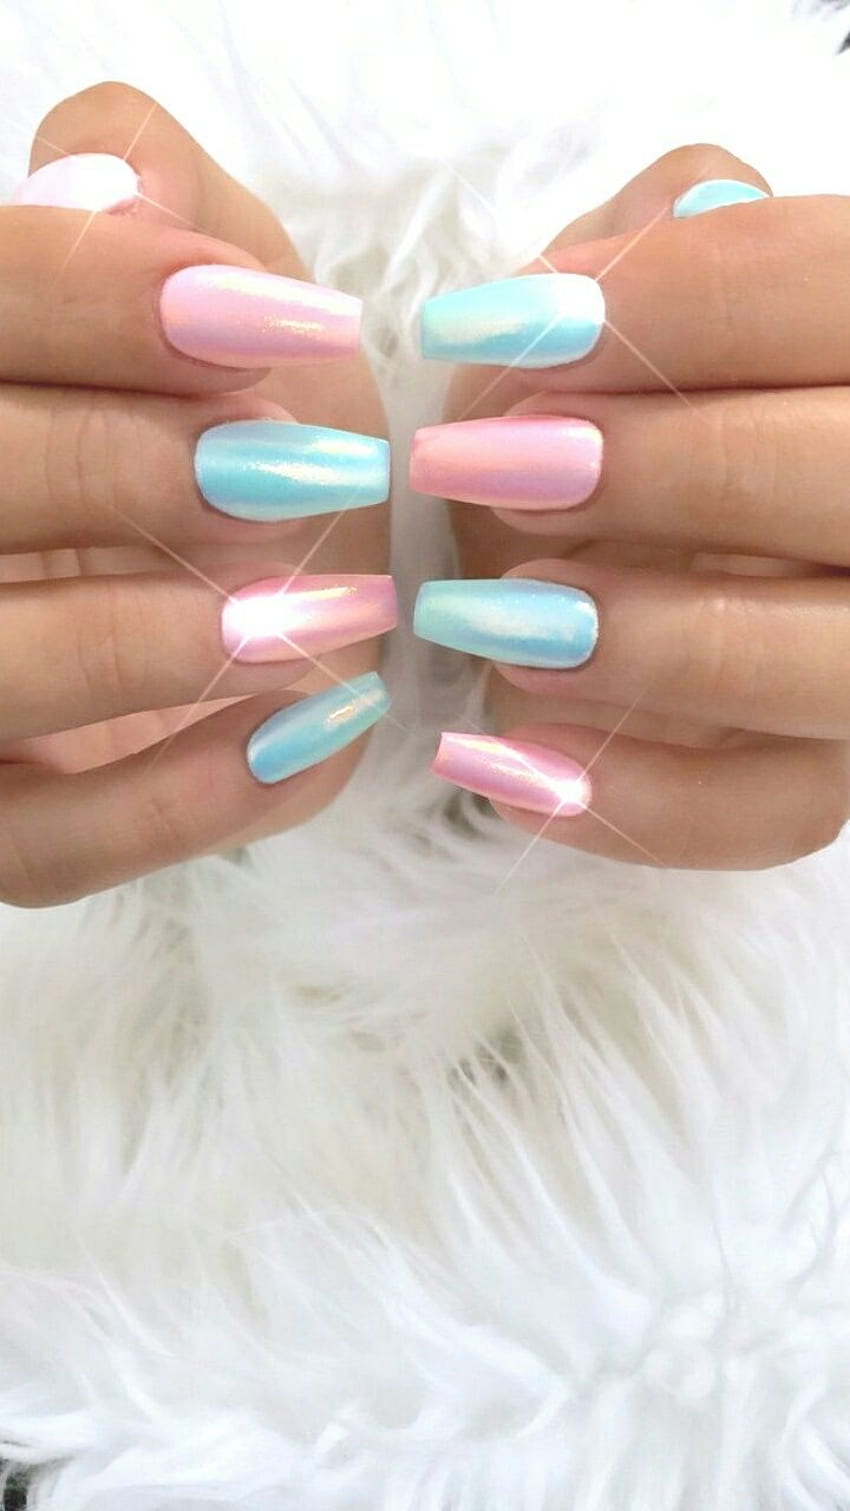 Lavish Nails and Beauty Salon Read Reviews and Book Classes on ClassPass